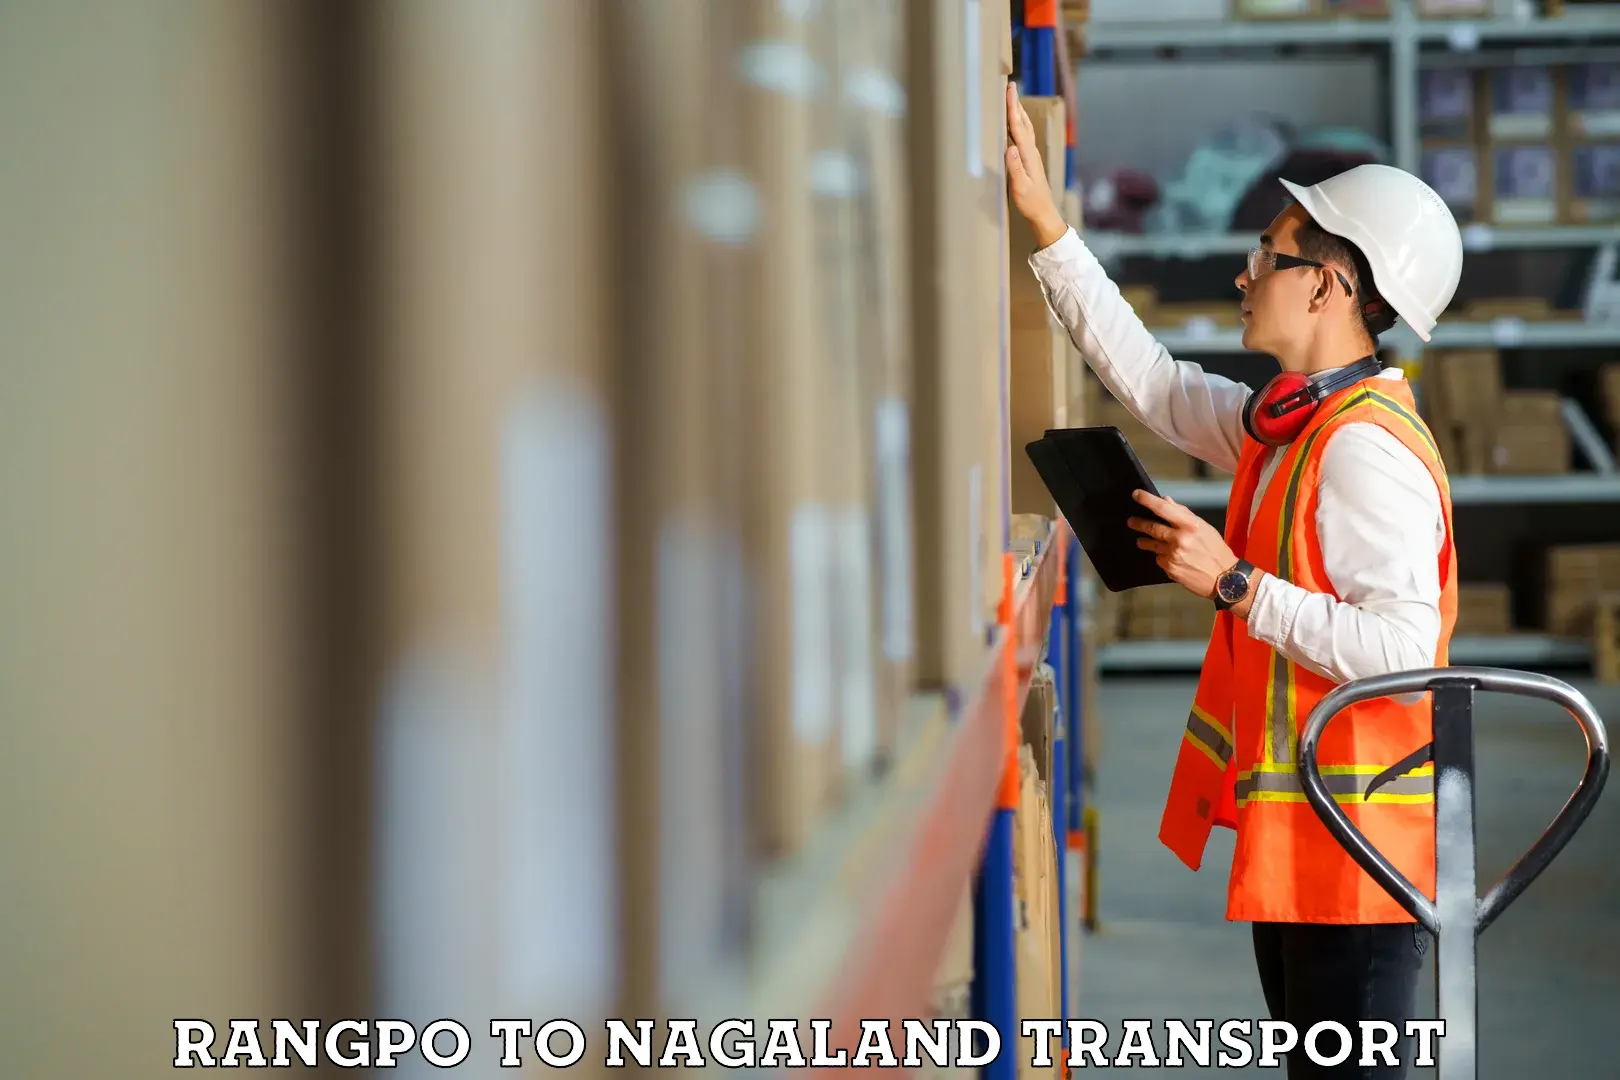 Container transport service Rangpo to Nagaland